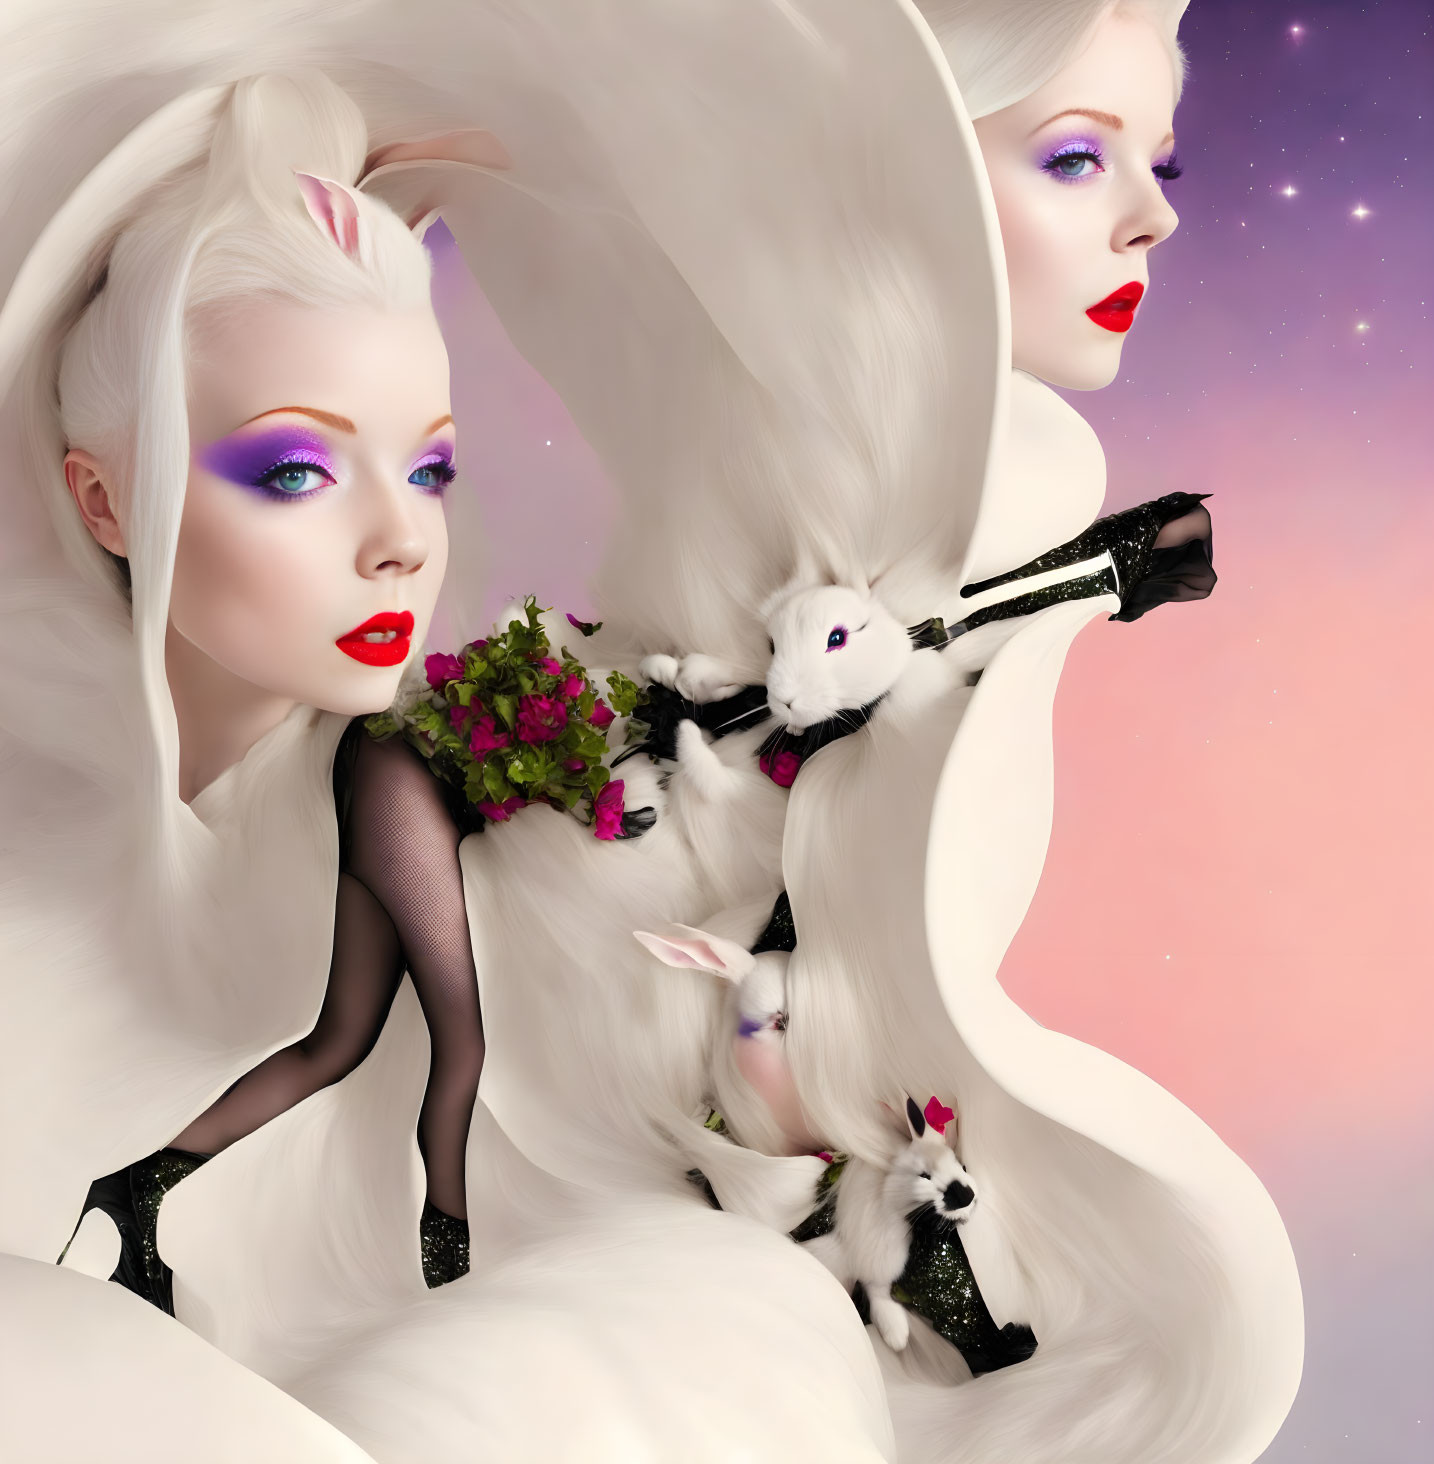 Surreal depiction of stylized women with white rabbits on pink backdrop